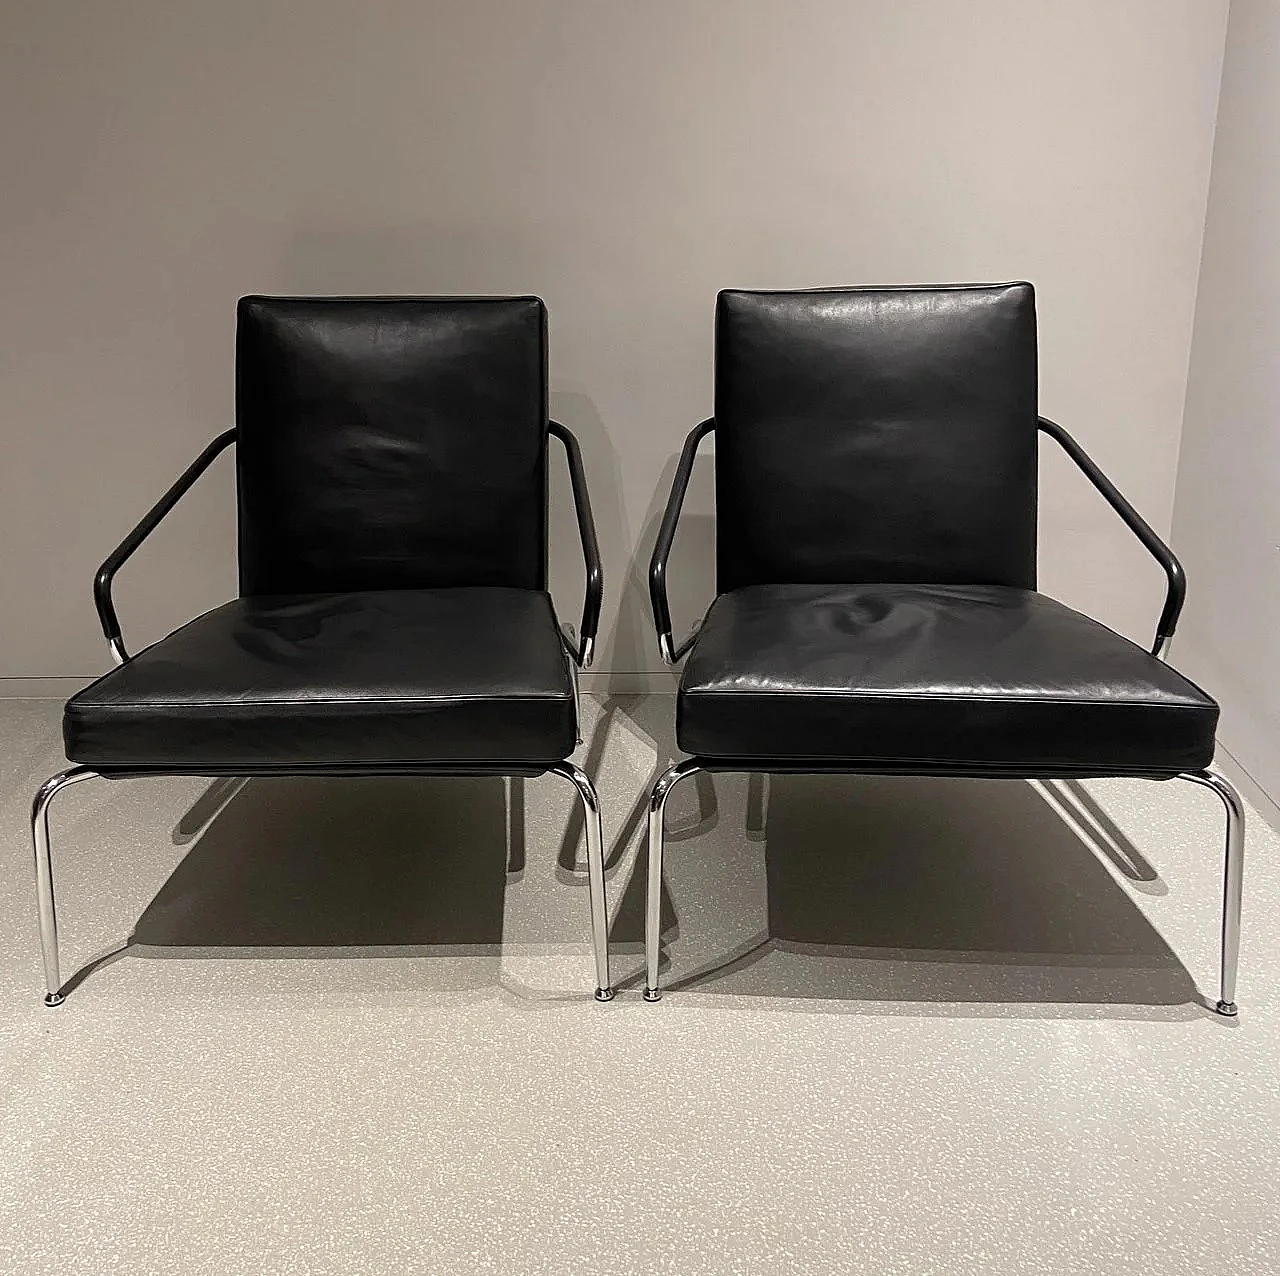 Pair of Berman leather armchairs by Rodolfo Dordoni for Minotti 1